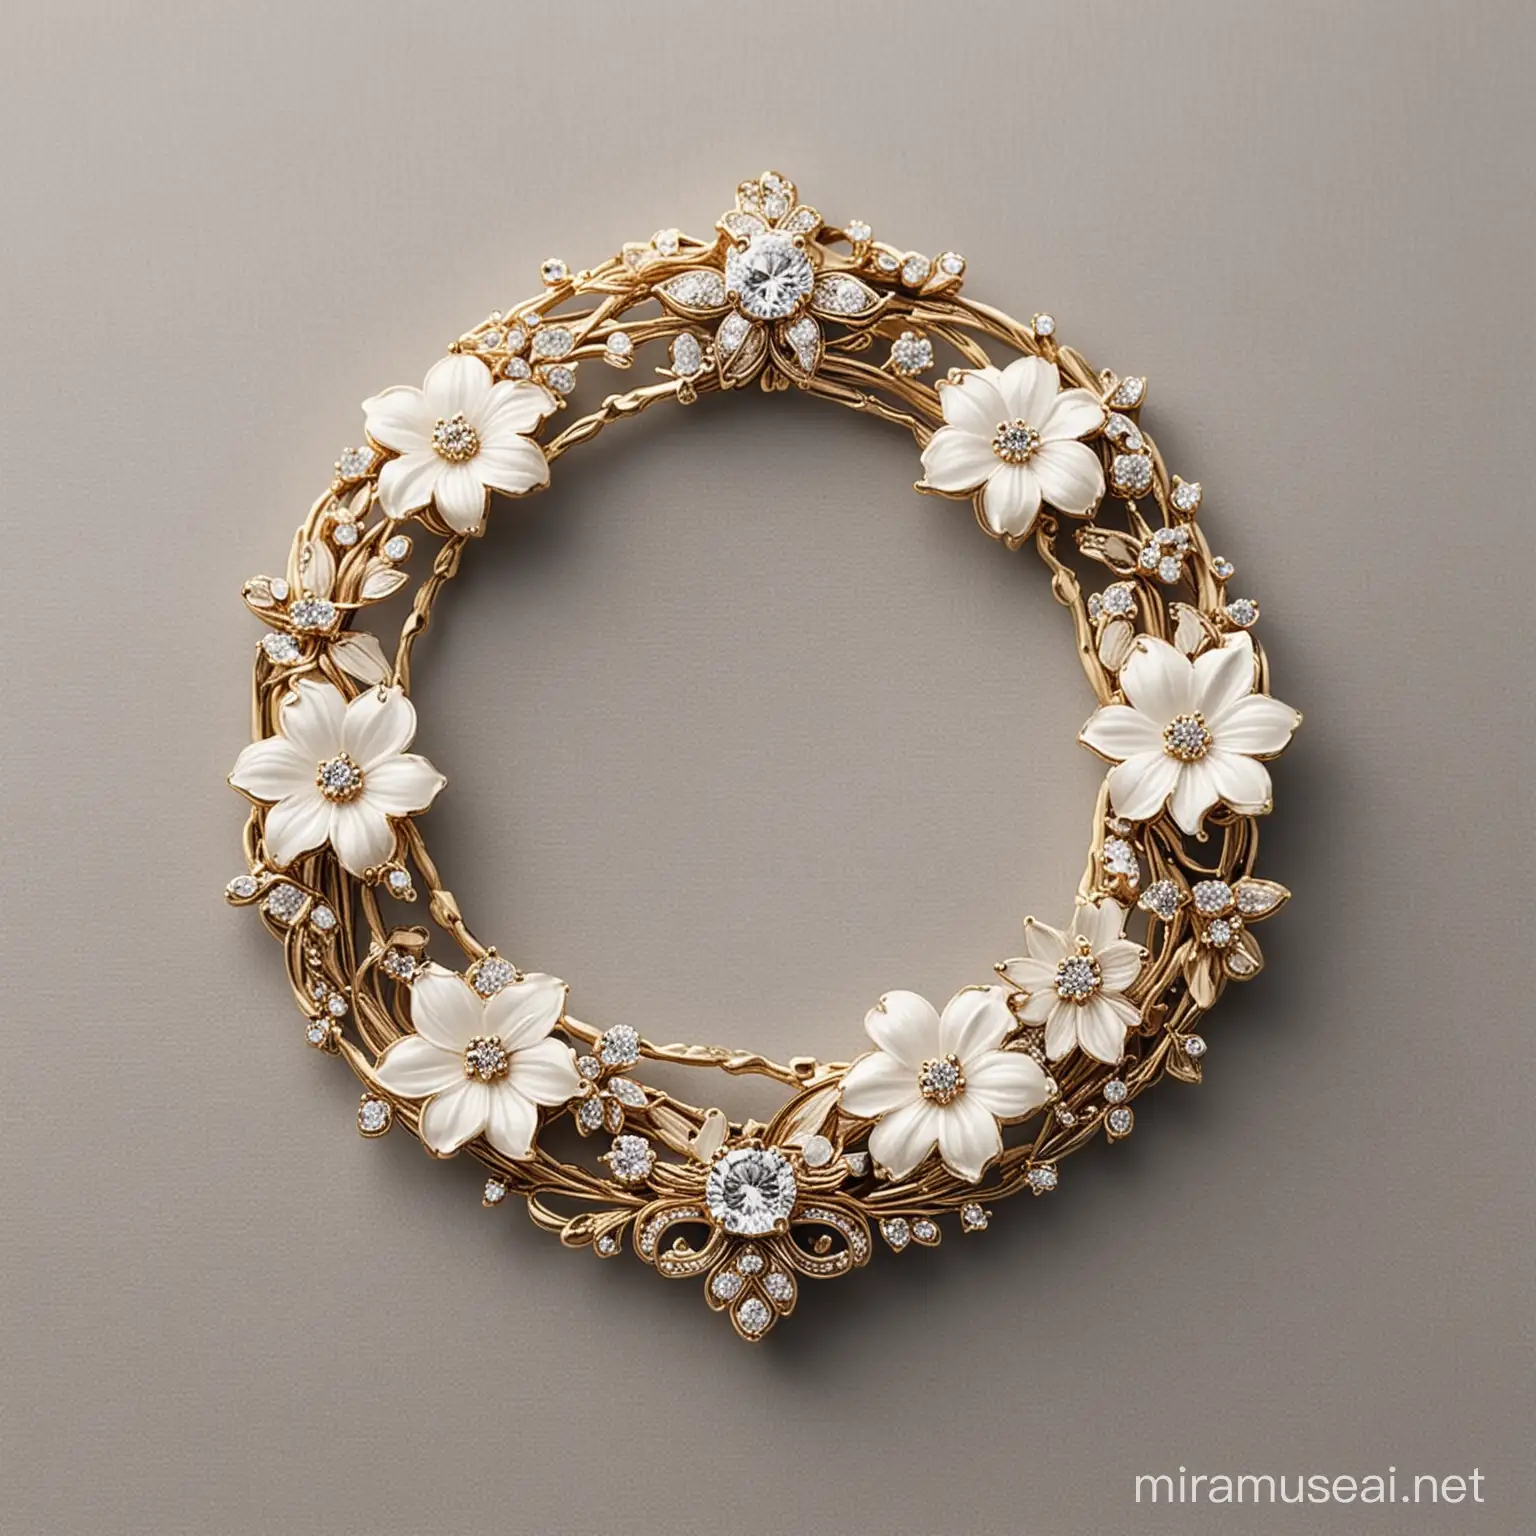 i want a logo of the jewellary  desigining and background fill with some white flowers